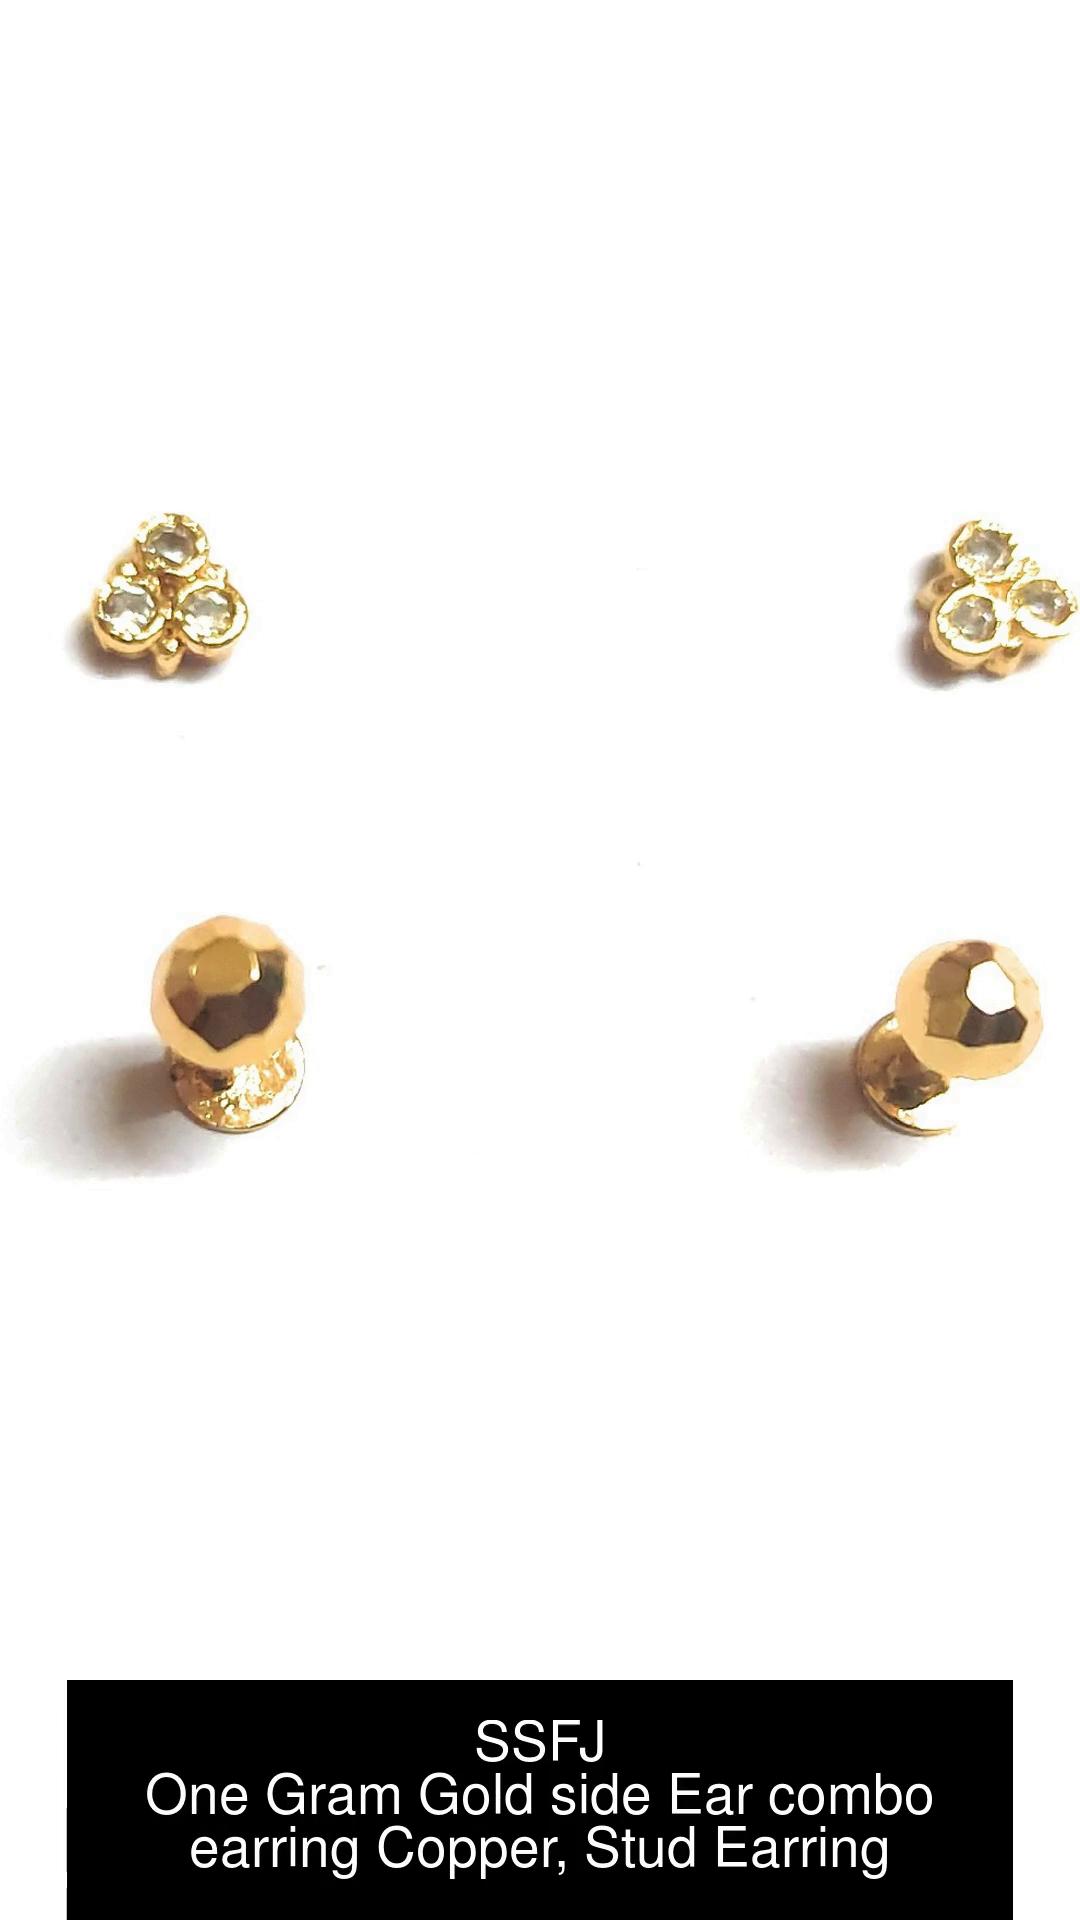 How to Buy and Wear Mismatched Earrings  Q Evon